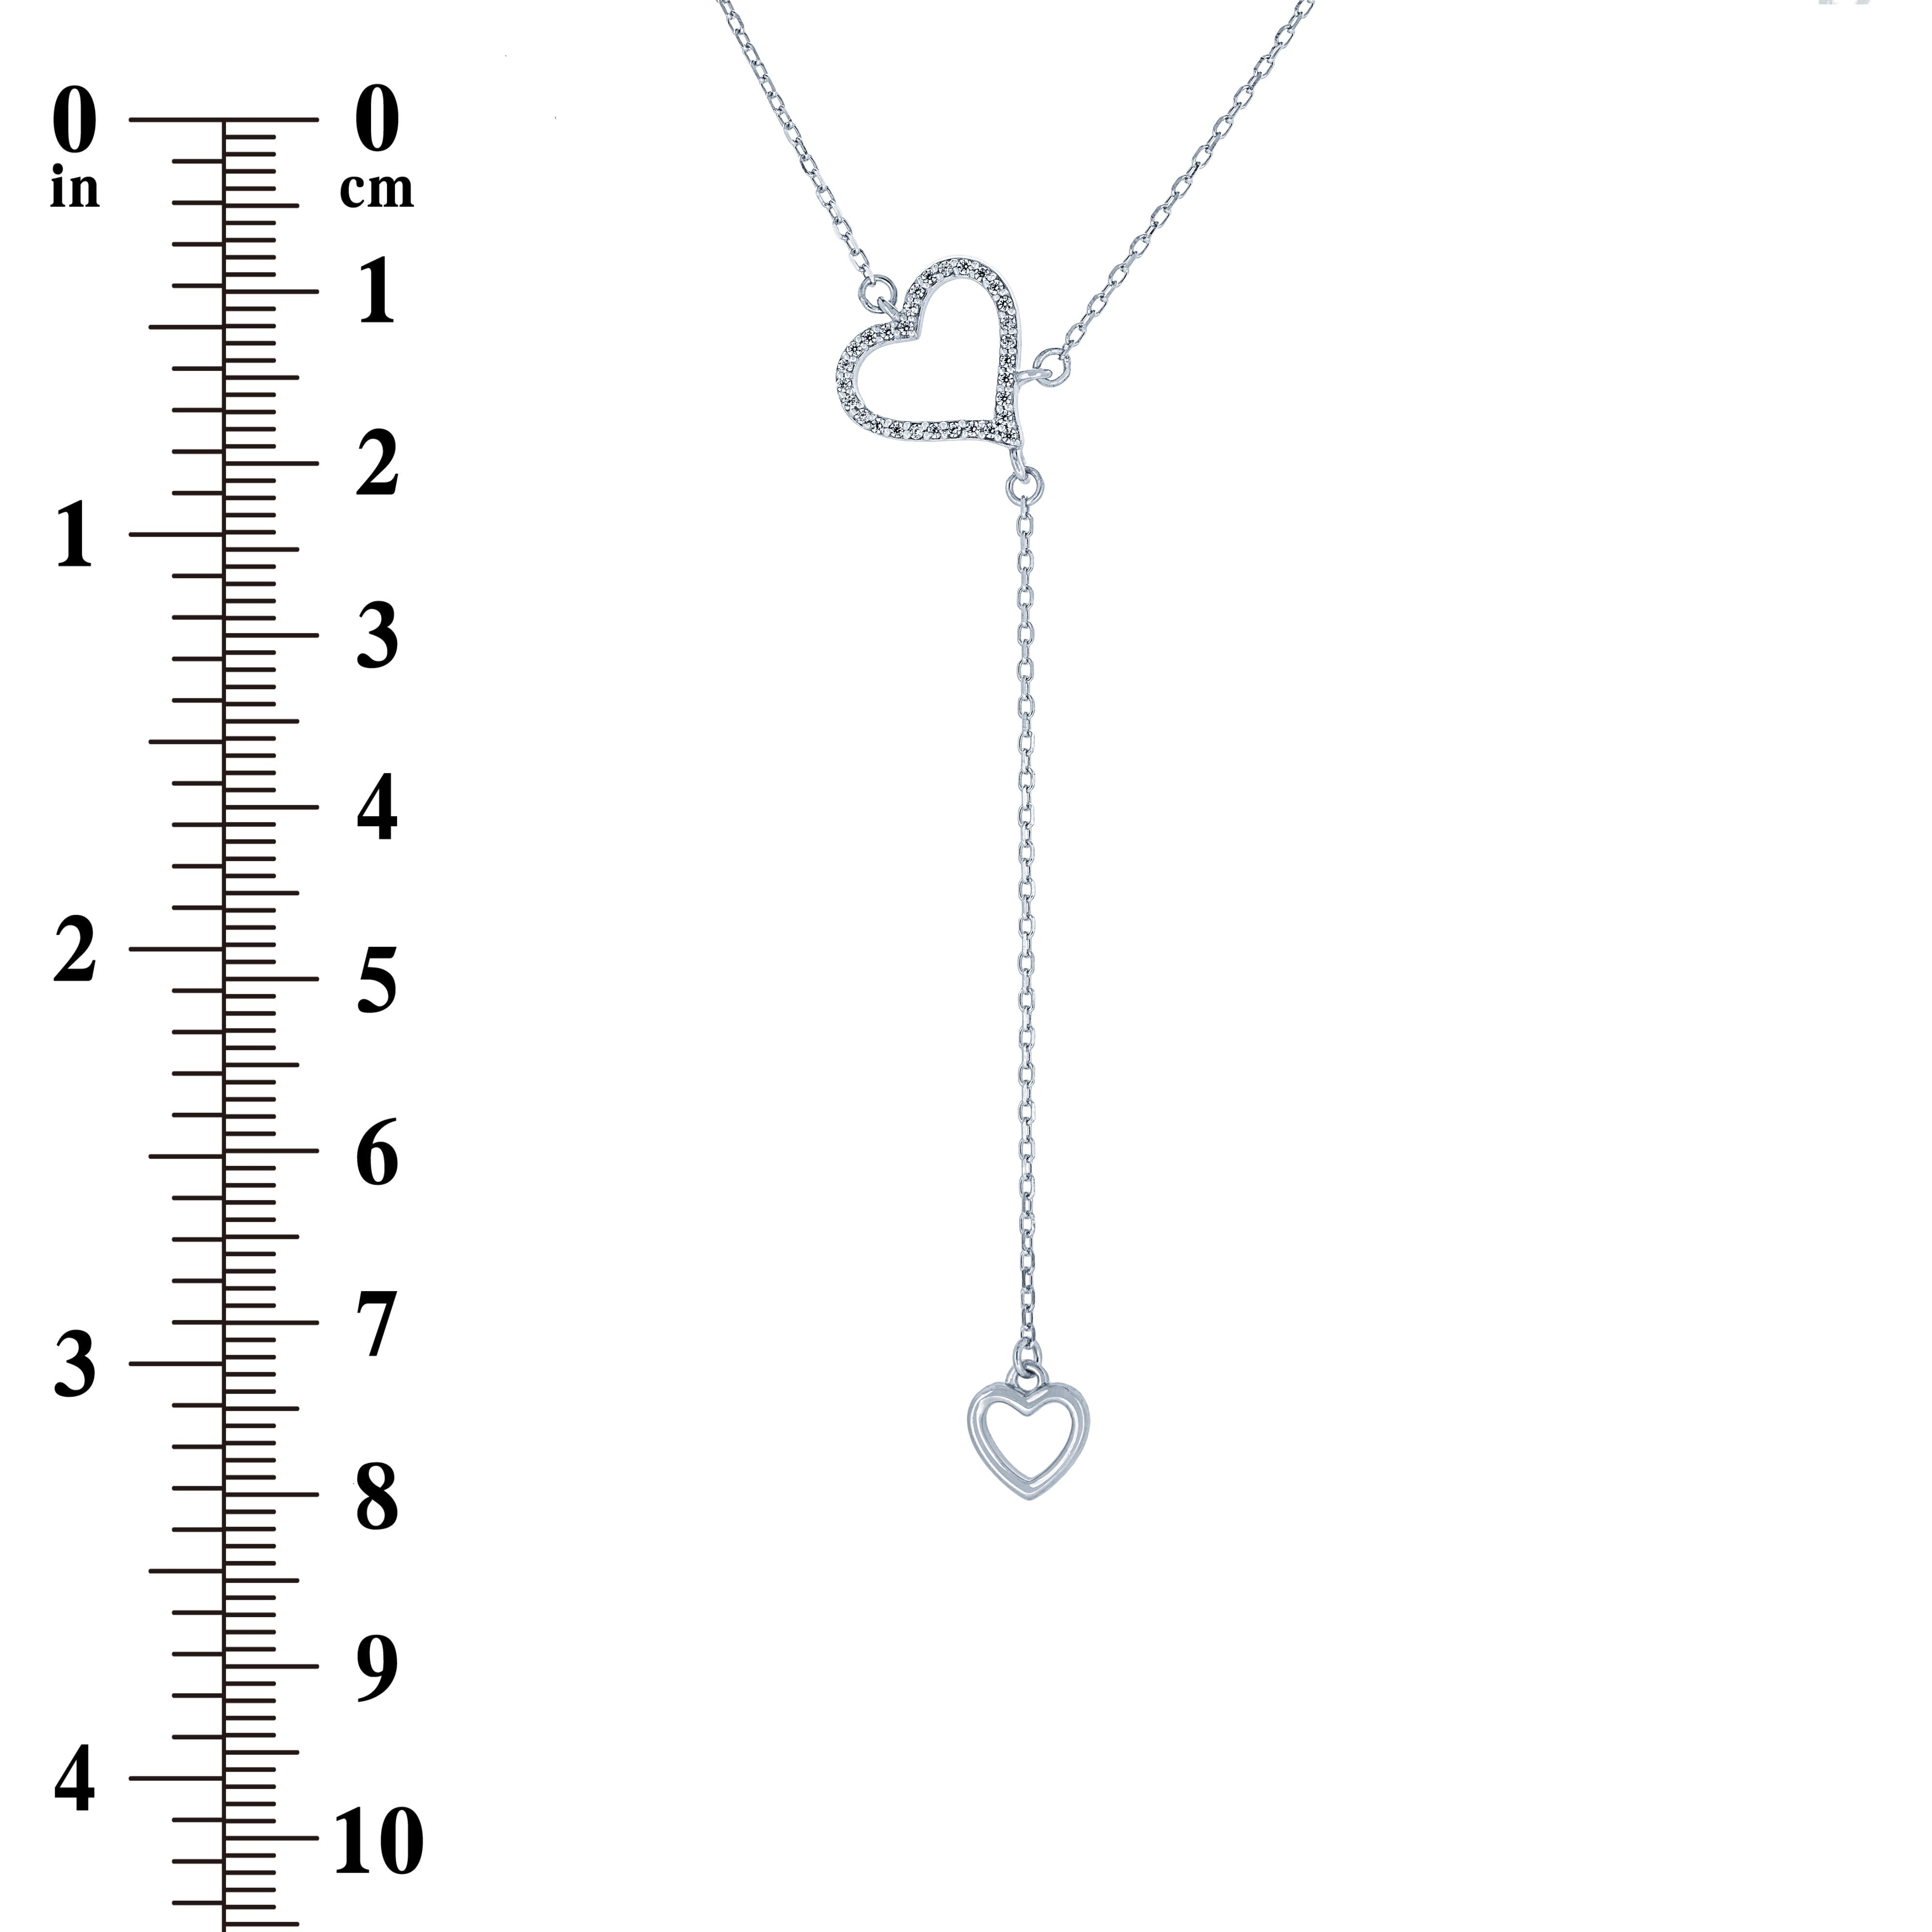 (100072) White Cubic Zirconia Hearts Necklace In Sterling Silver